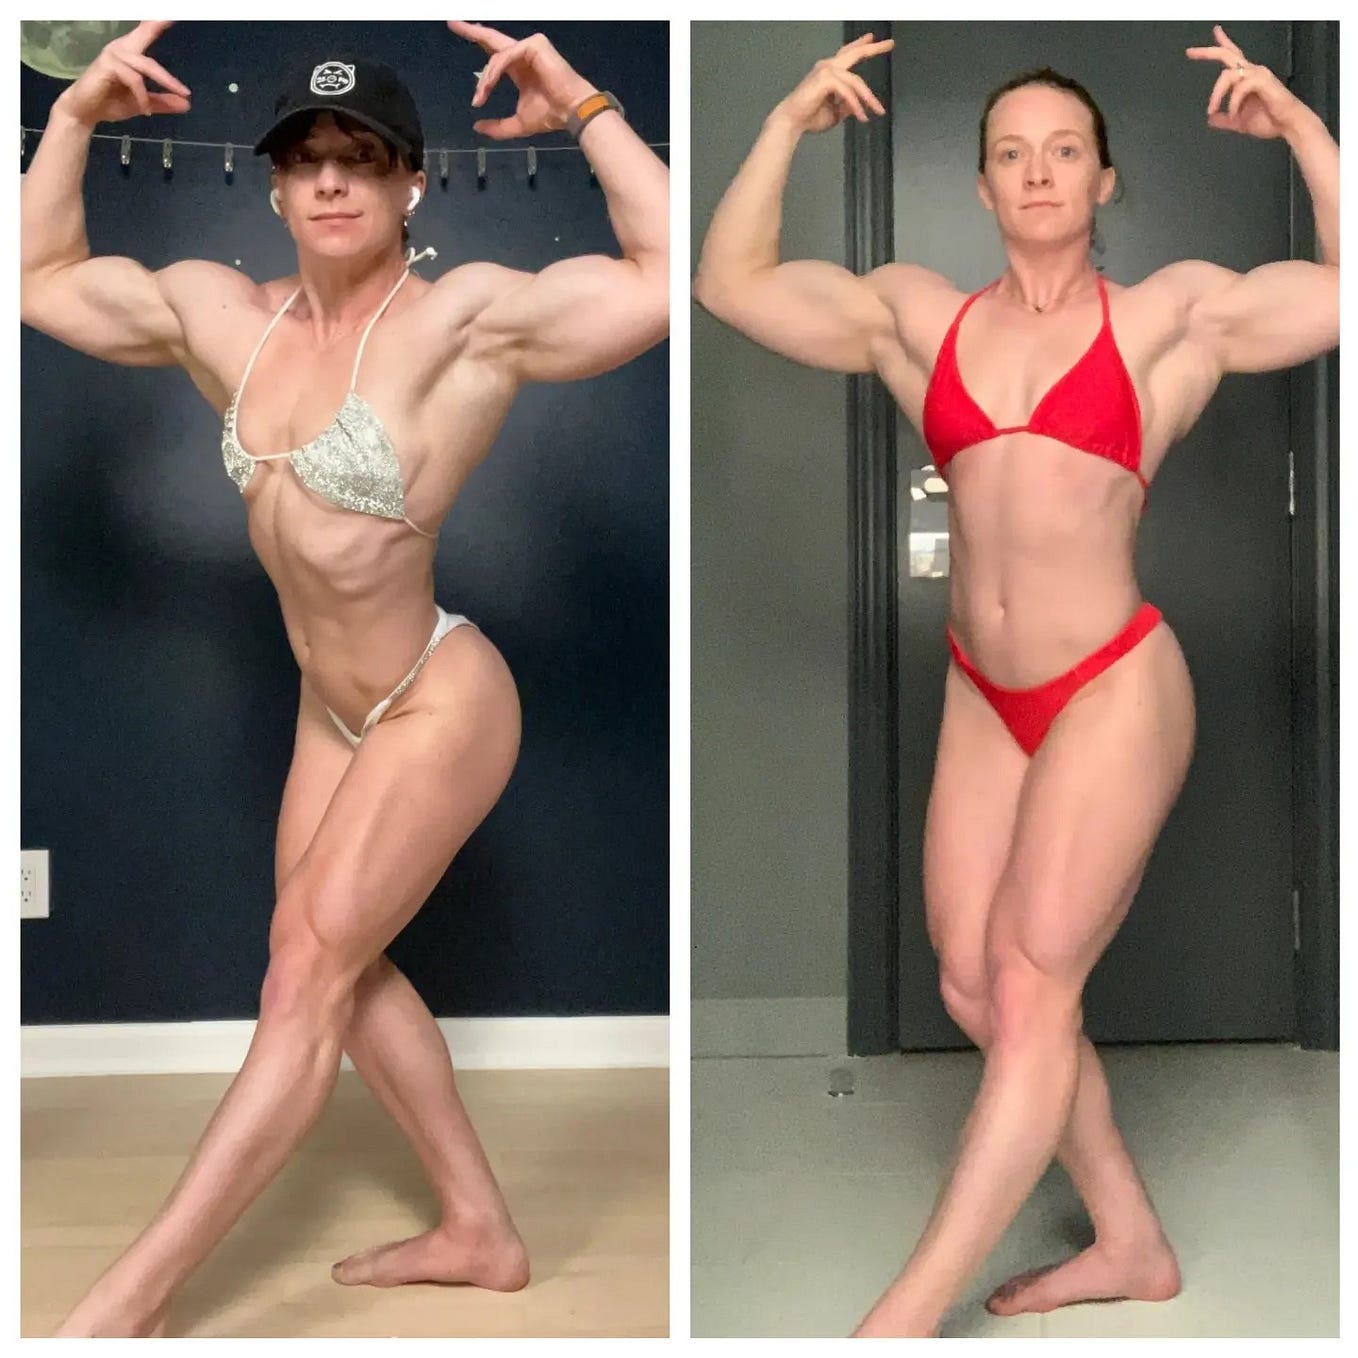 Body Transformation Coaching ⋆ Five Starr Physique